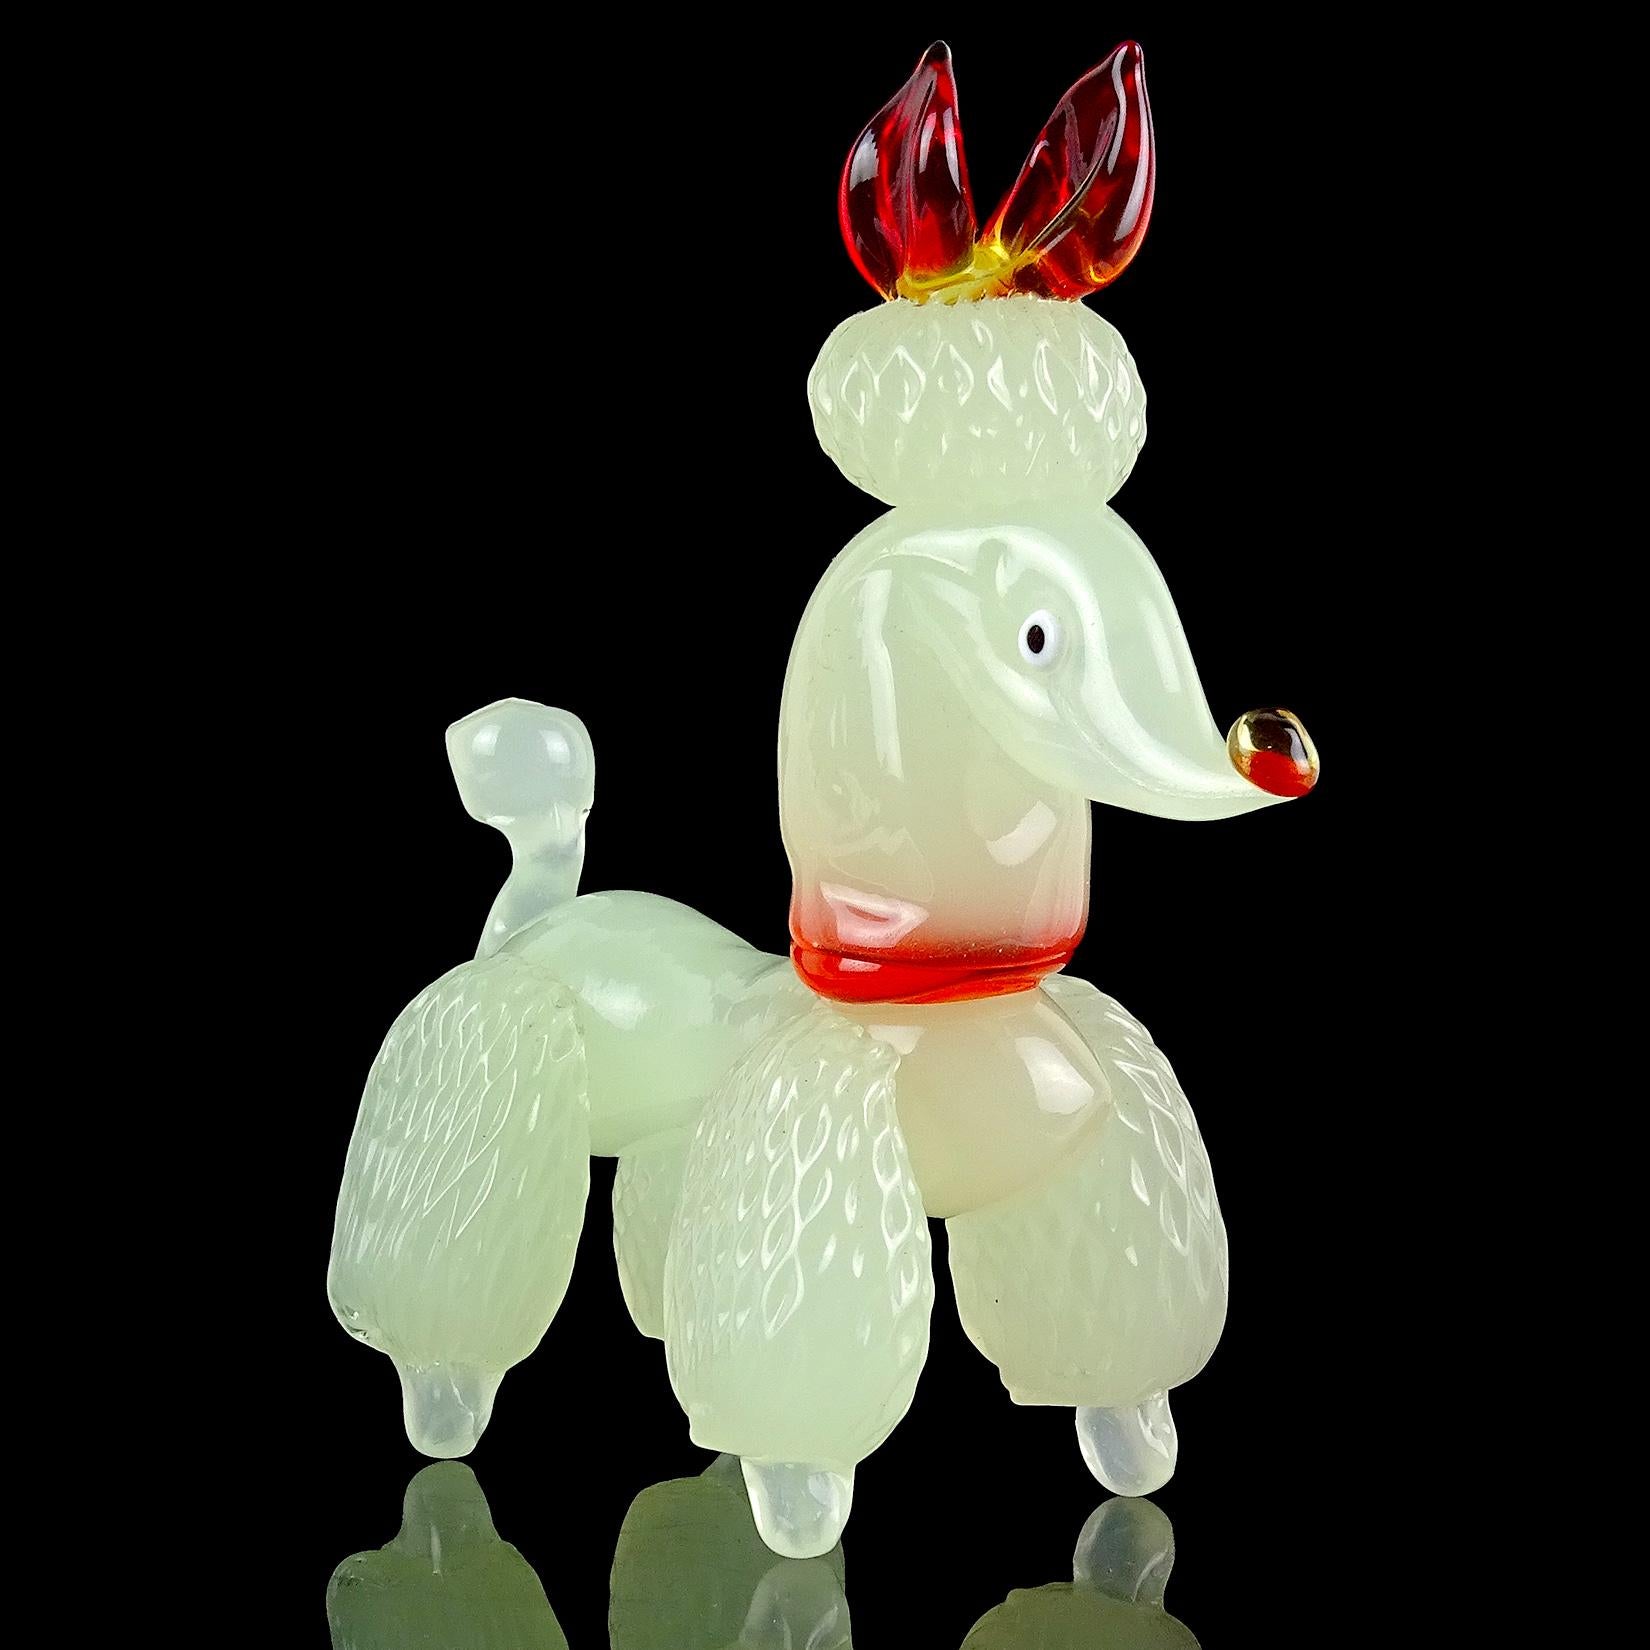 Very cute Murano hand blown opalescent creamy white Italian art glass poodle puppy dog figurine. It has been well groomed, with pompoms on its legs, tail and top of the head. The applied collar and bow have a red orange color, with some yellow as